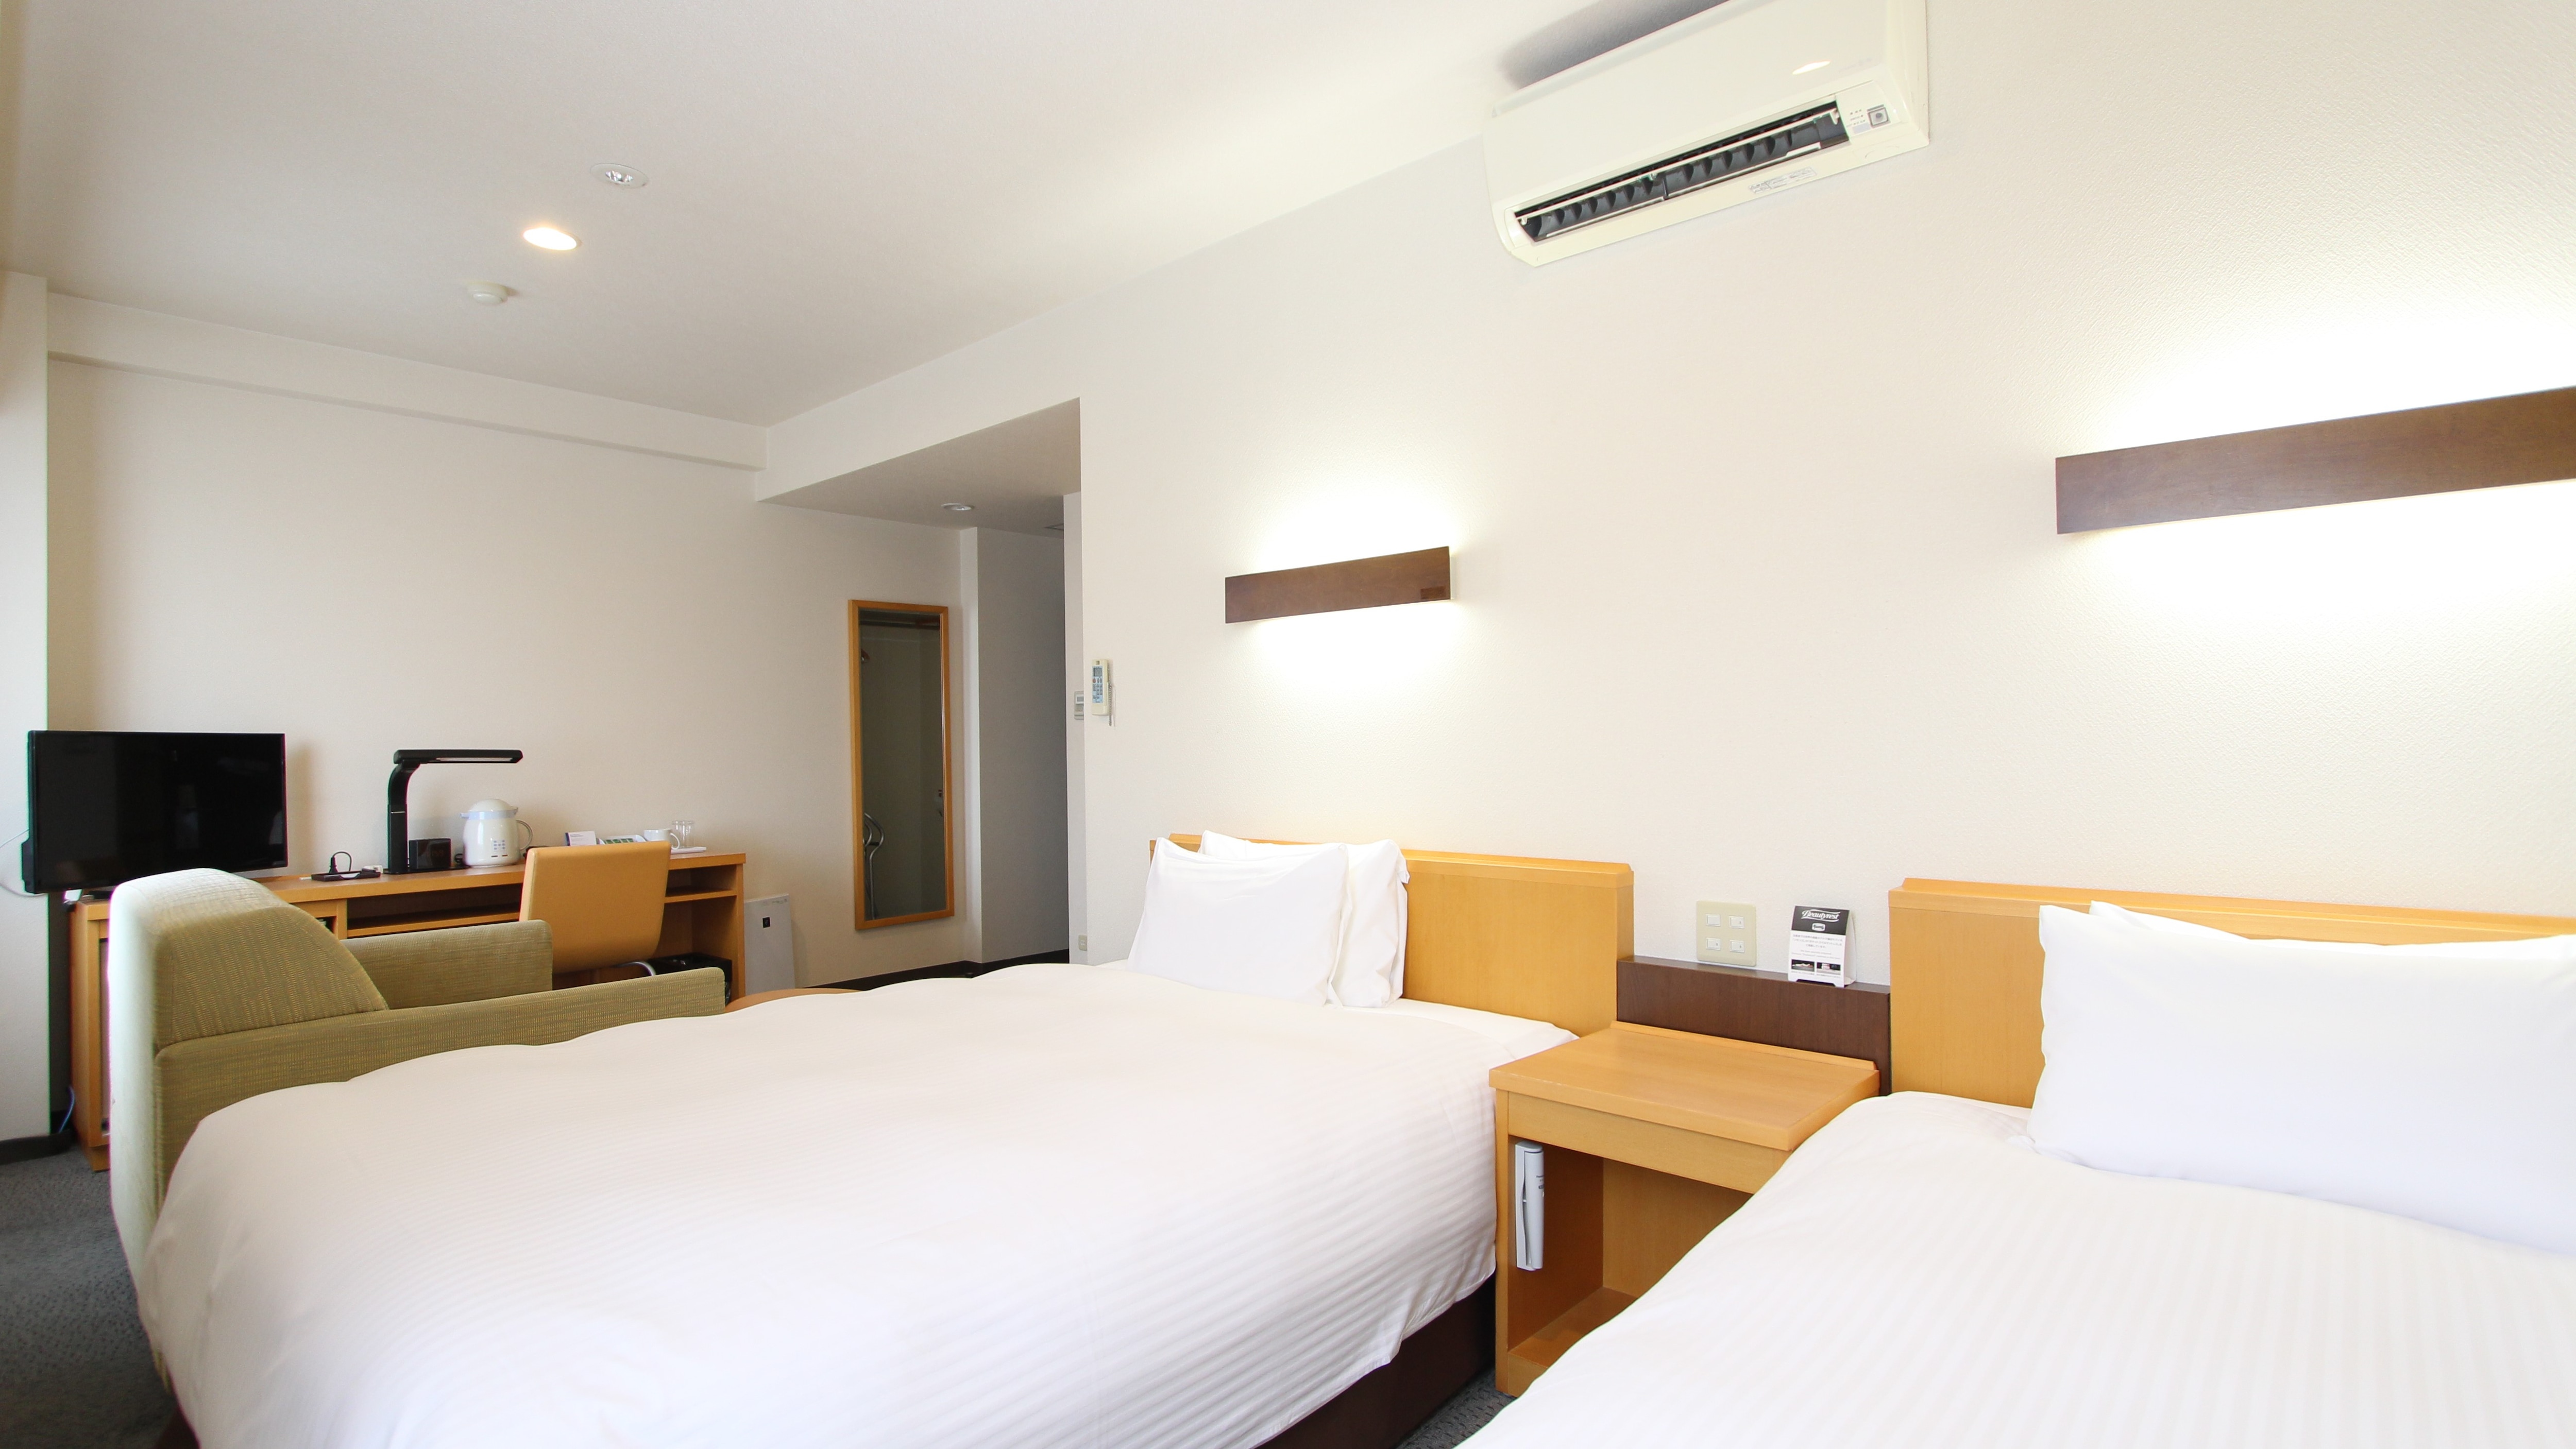 Recommended for families and couples Twin room (26.8㎡)